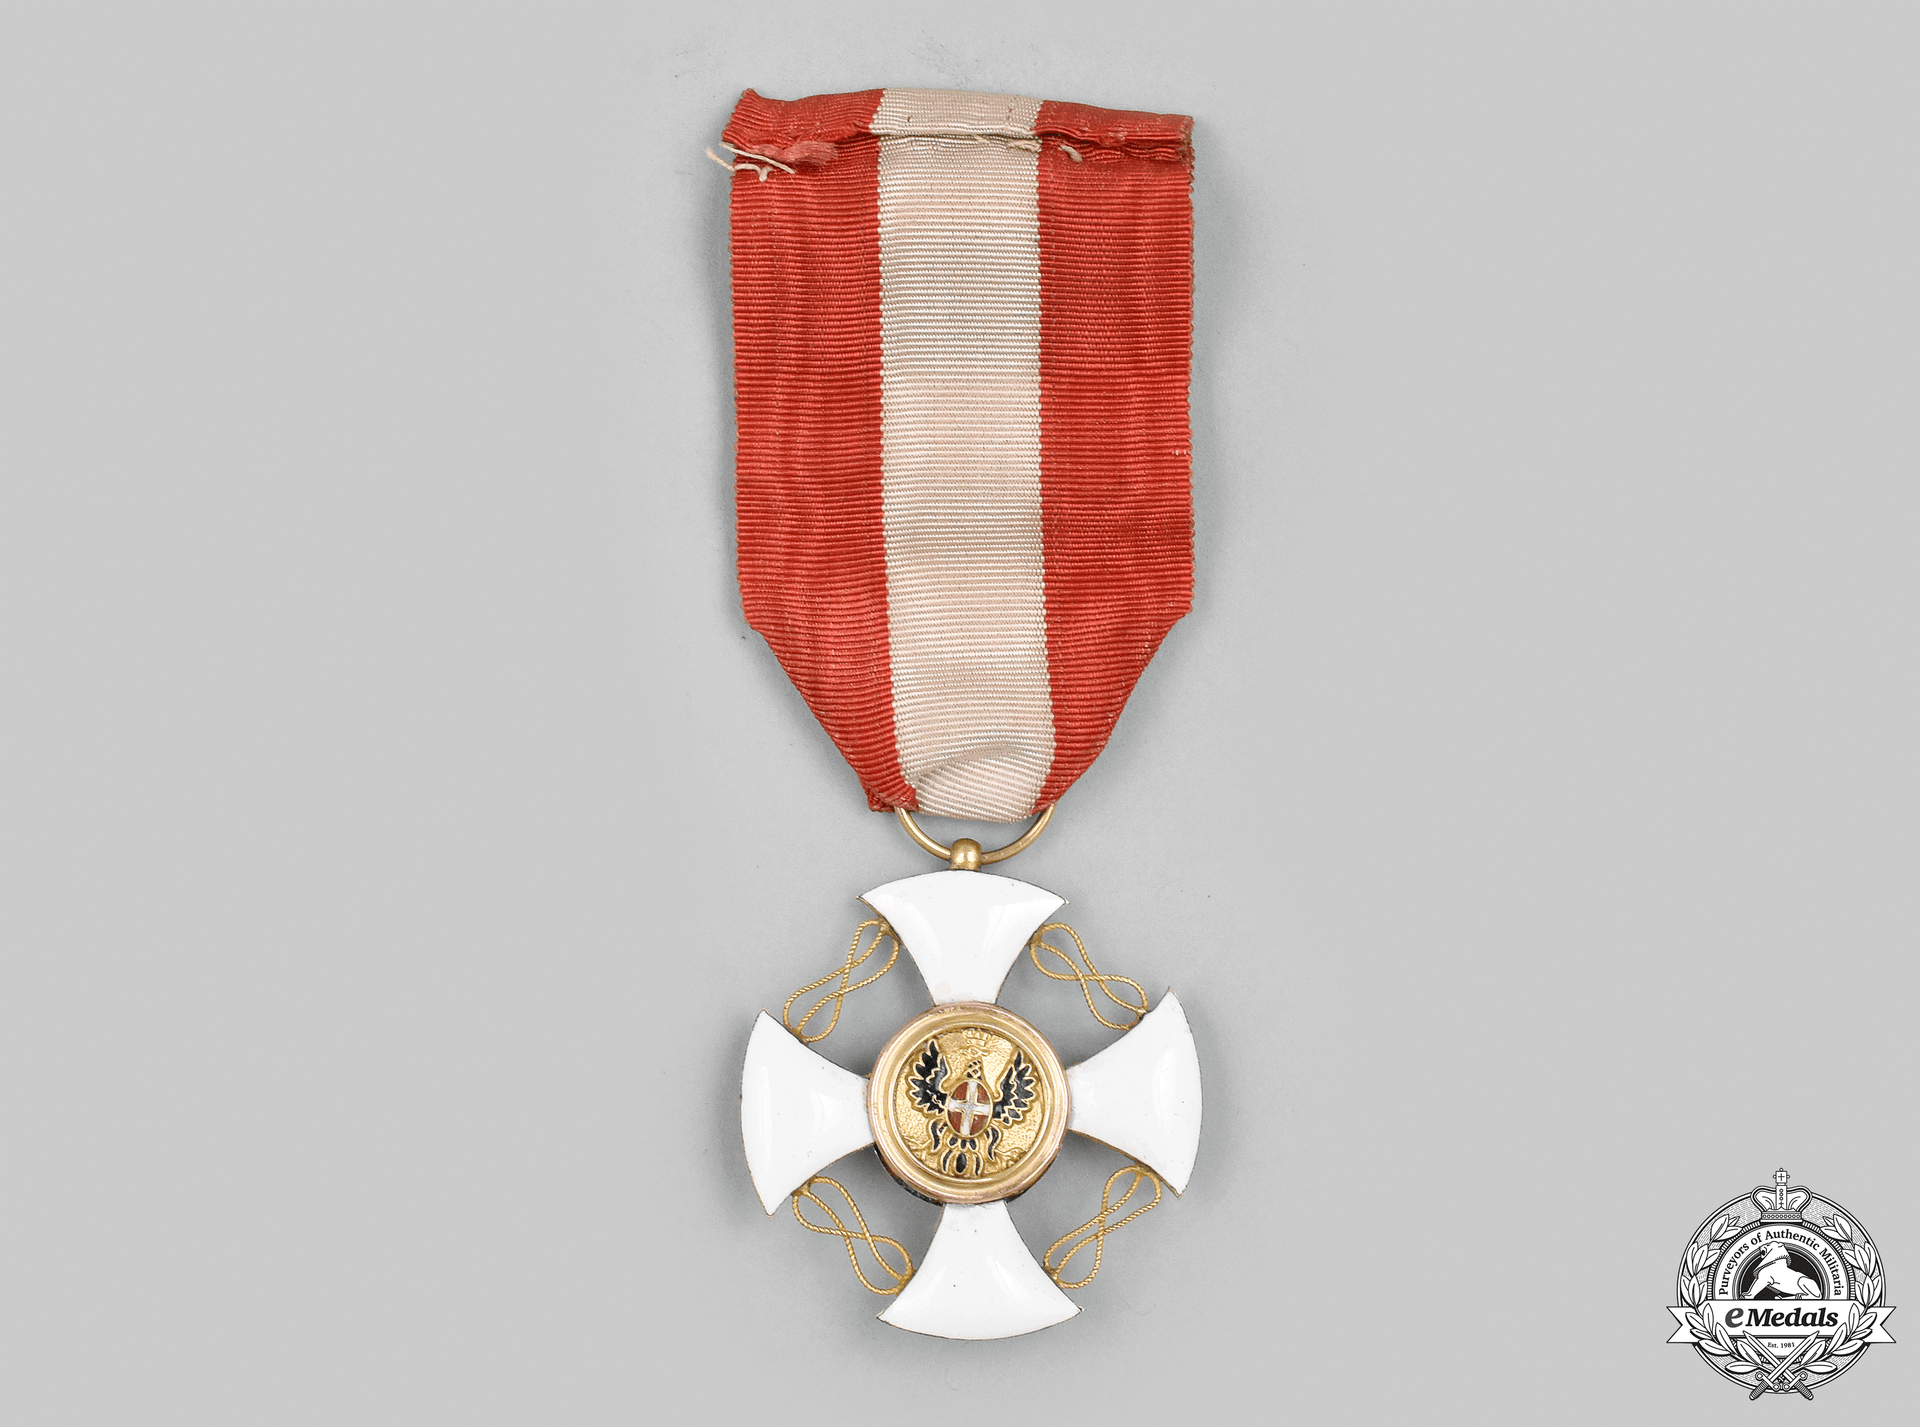 italy,_kingdom._an_order_of_the_crown_in_gold,_v_class_knight_with3_crowns,_c.1920_m21_mnc3453_1